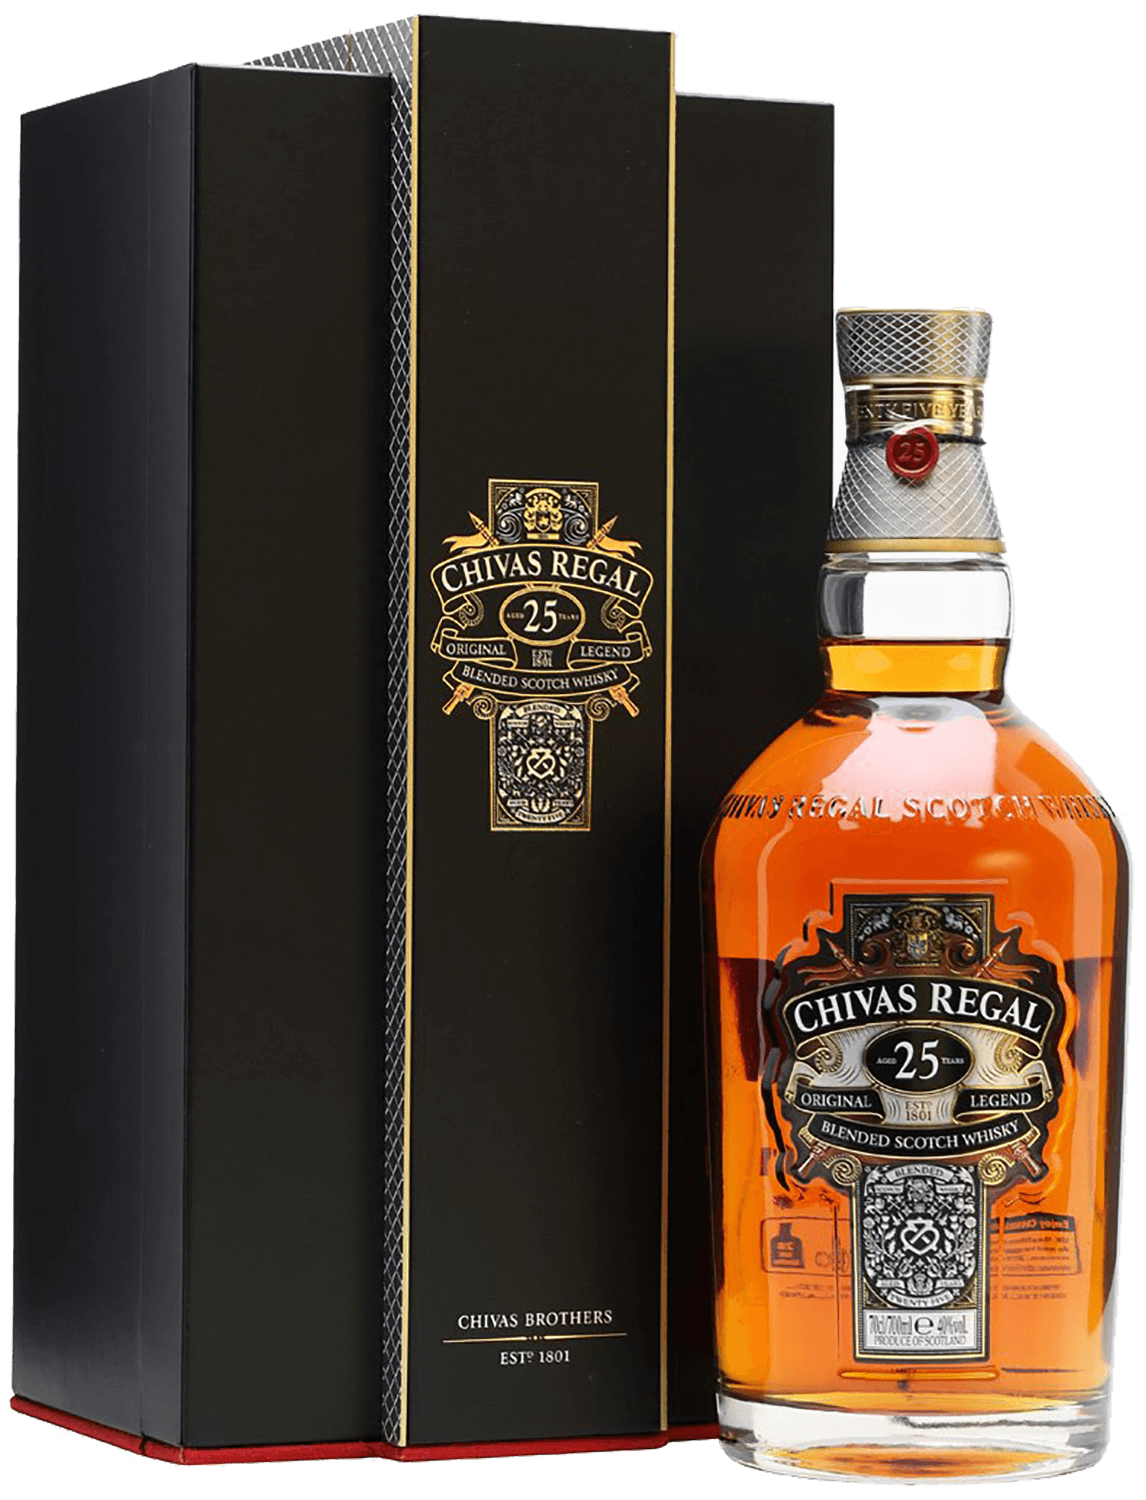 Chivas Regal 25 y.o. blended scotch whisky (gift box) chivas regal blended scotch whisky 12 y o gift box